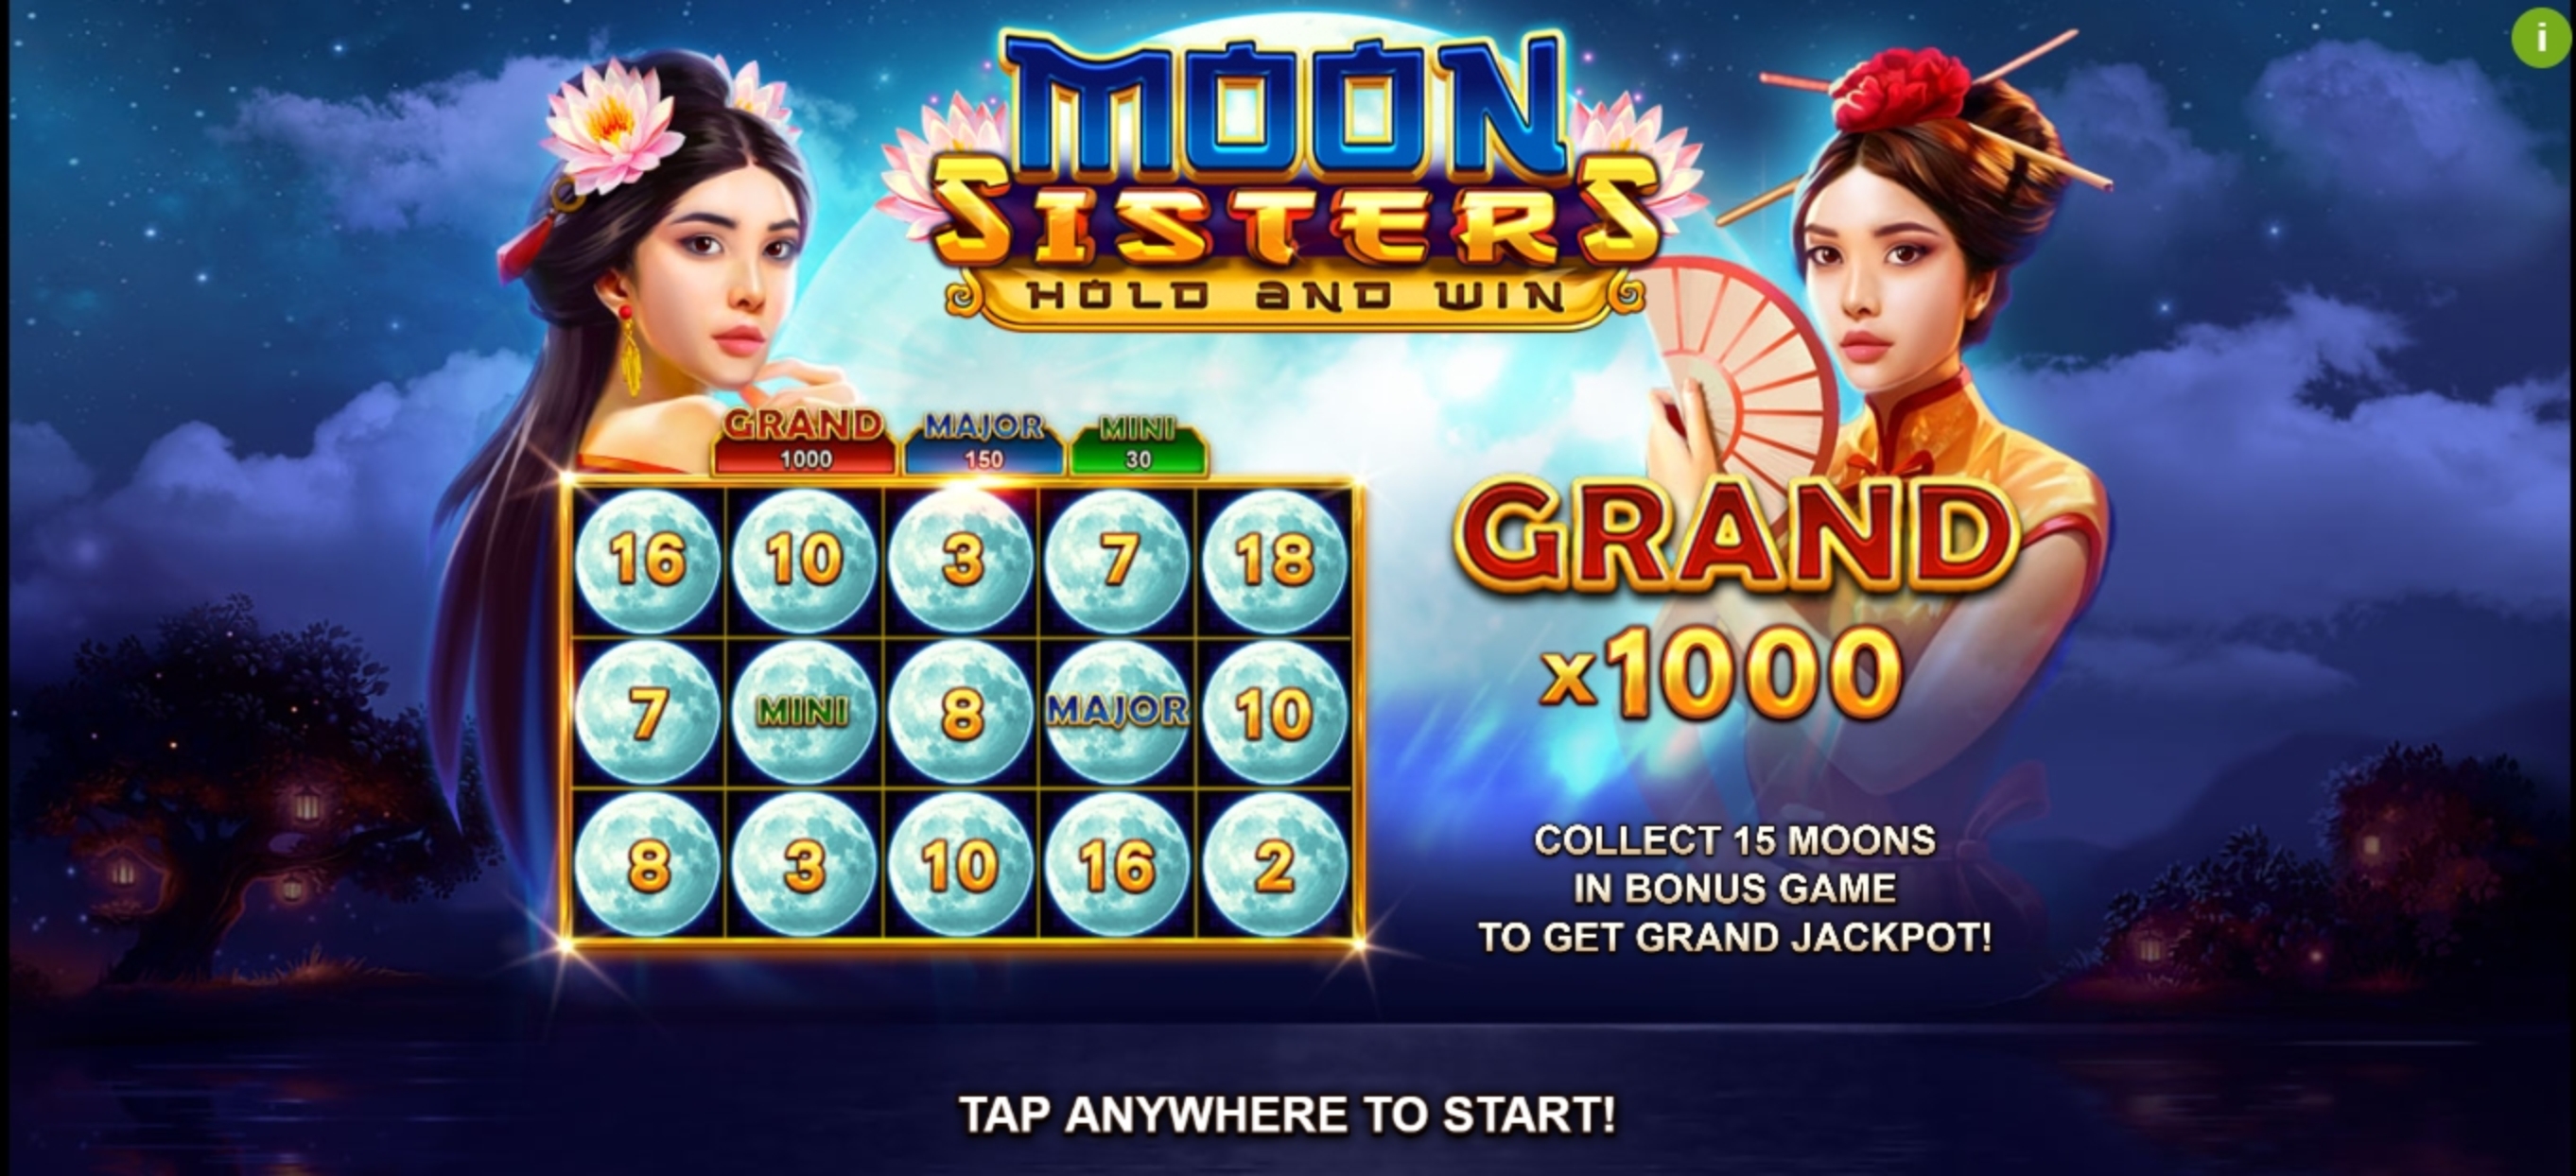 Play Moon Sisters Free Casino Slot Game by Booongo Gaming